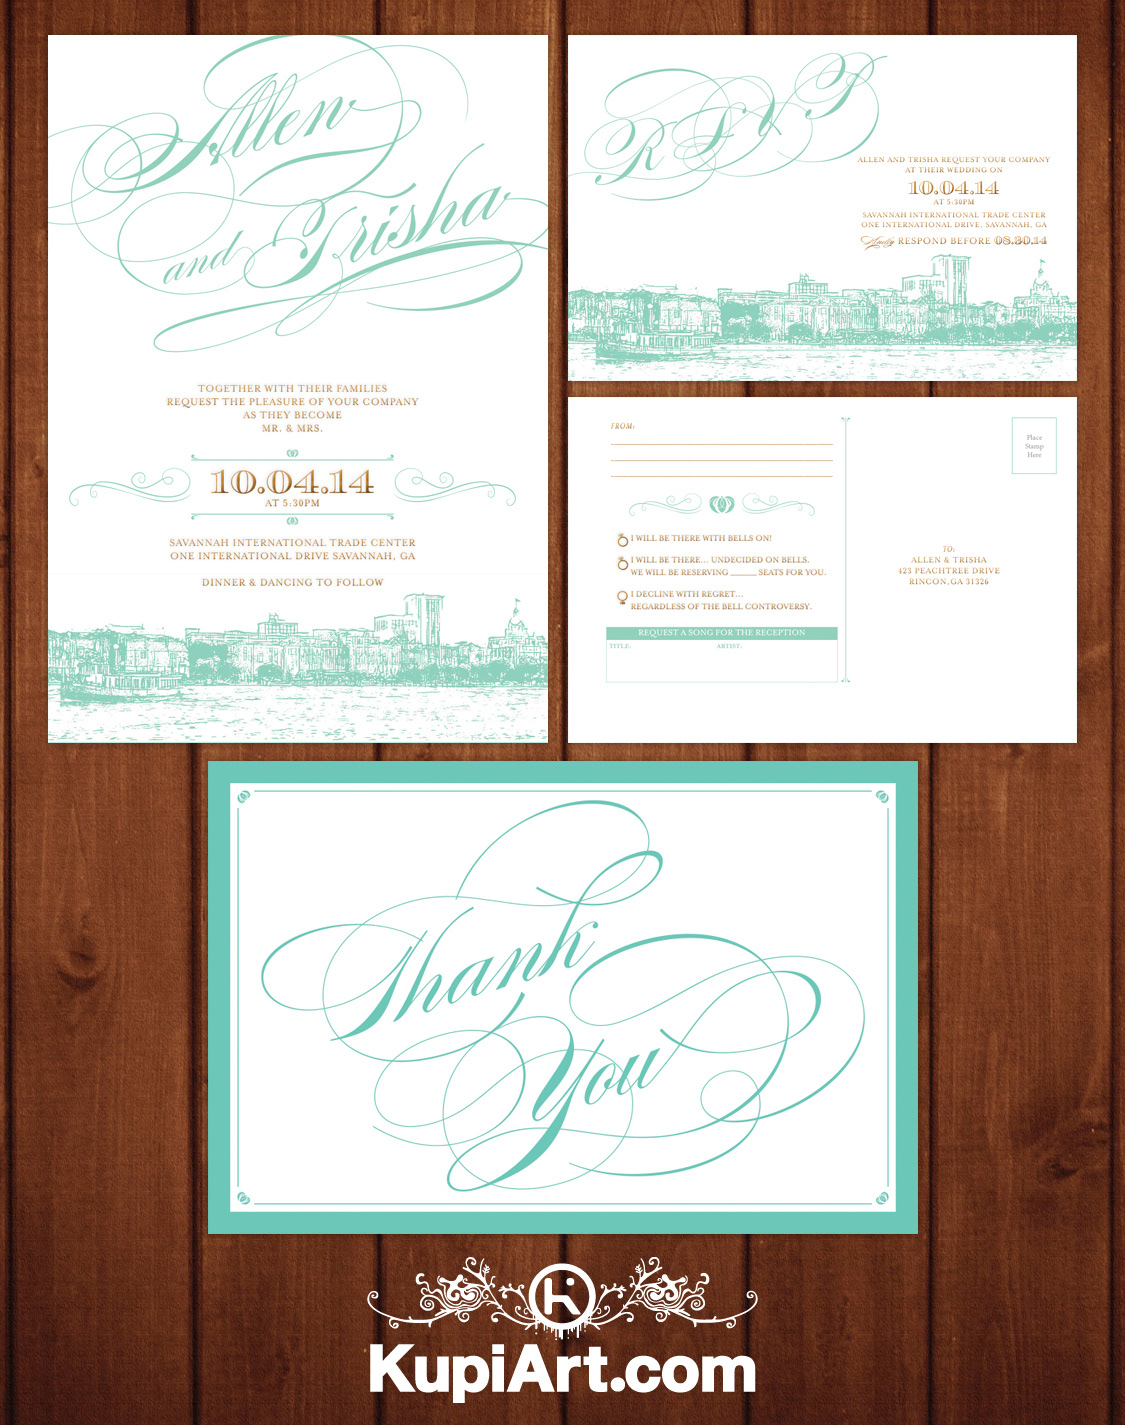 invitations wedding thank you card cards bridal celebration anniversary party ceremony Direct mail rsvp